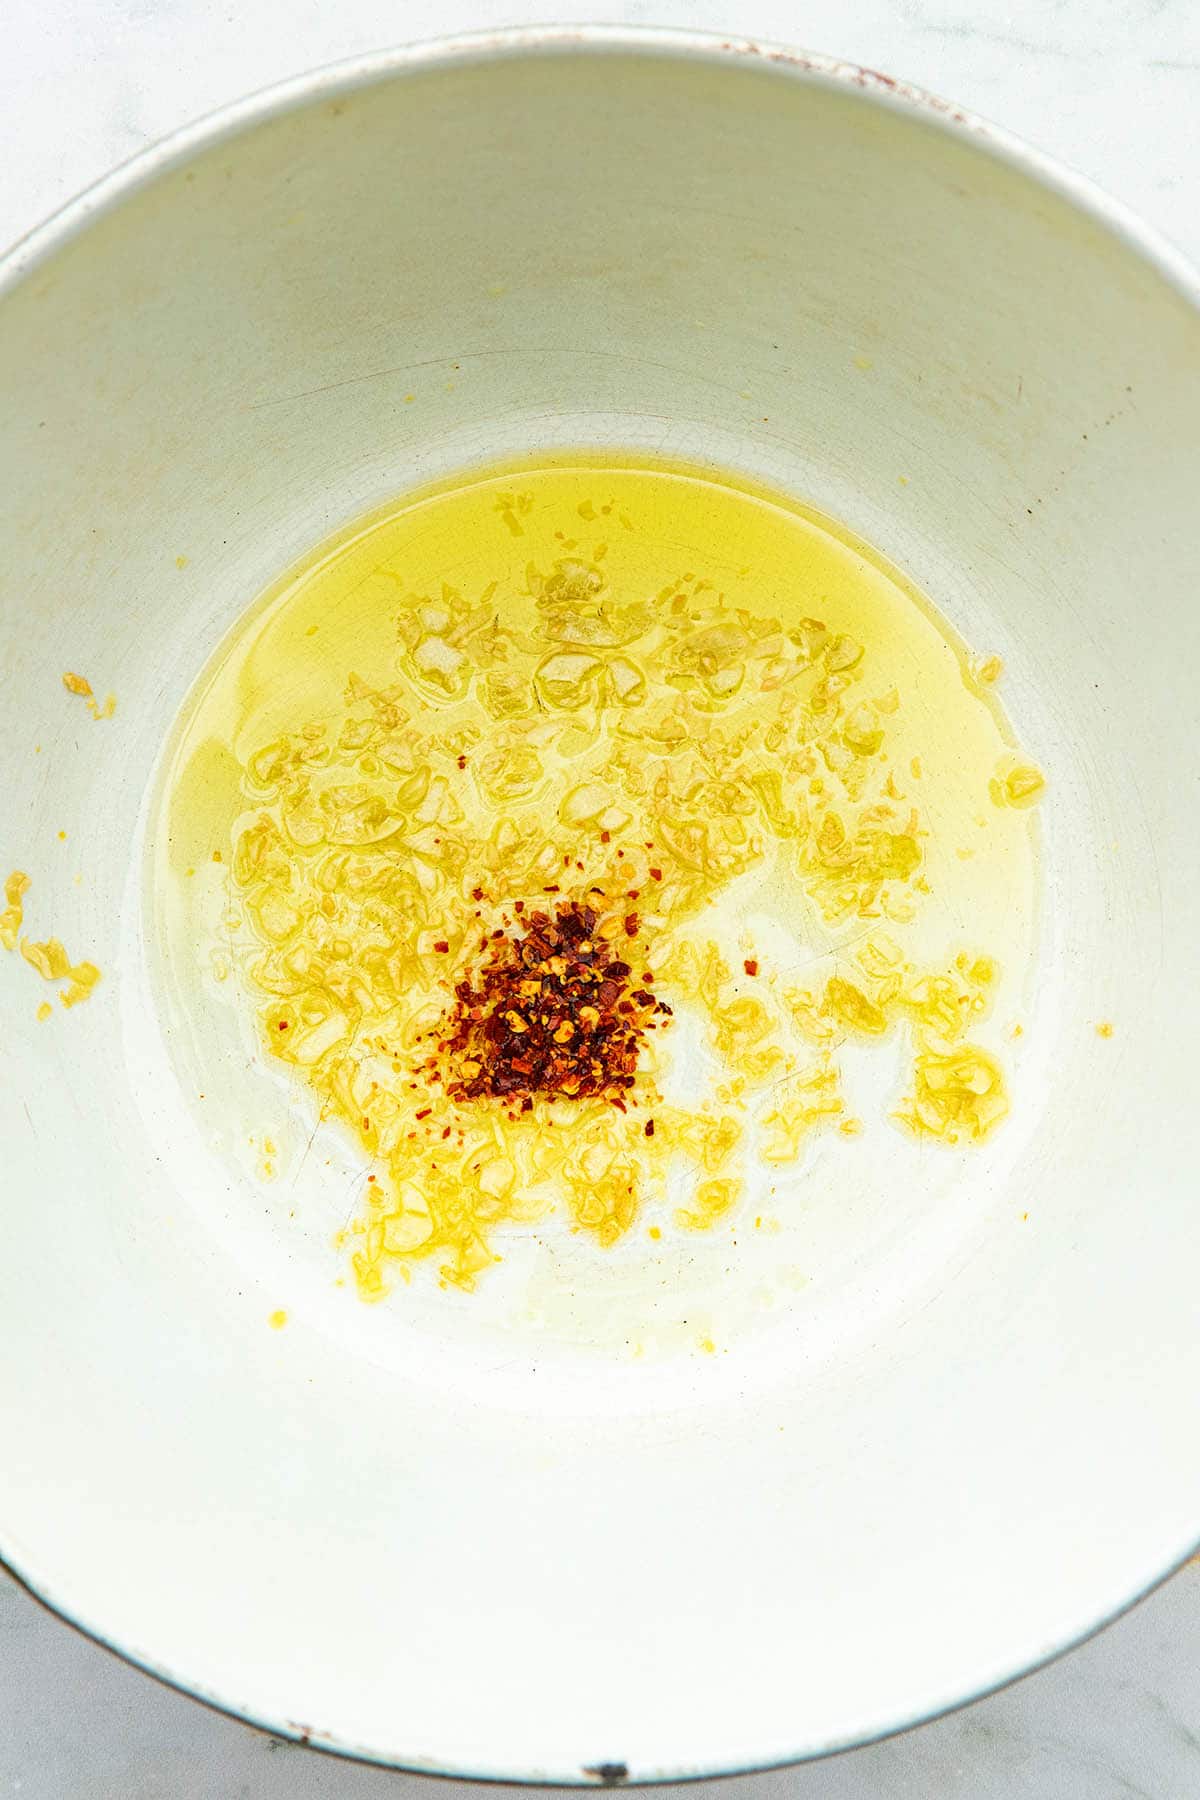 Chopped garlic, chilli flakes, and olive oil in the bottom of a pot.